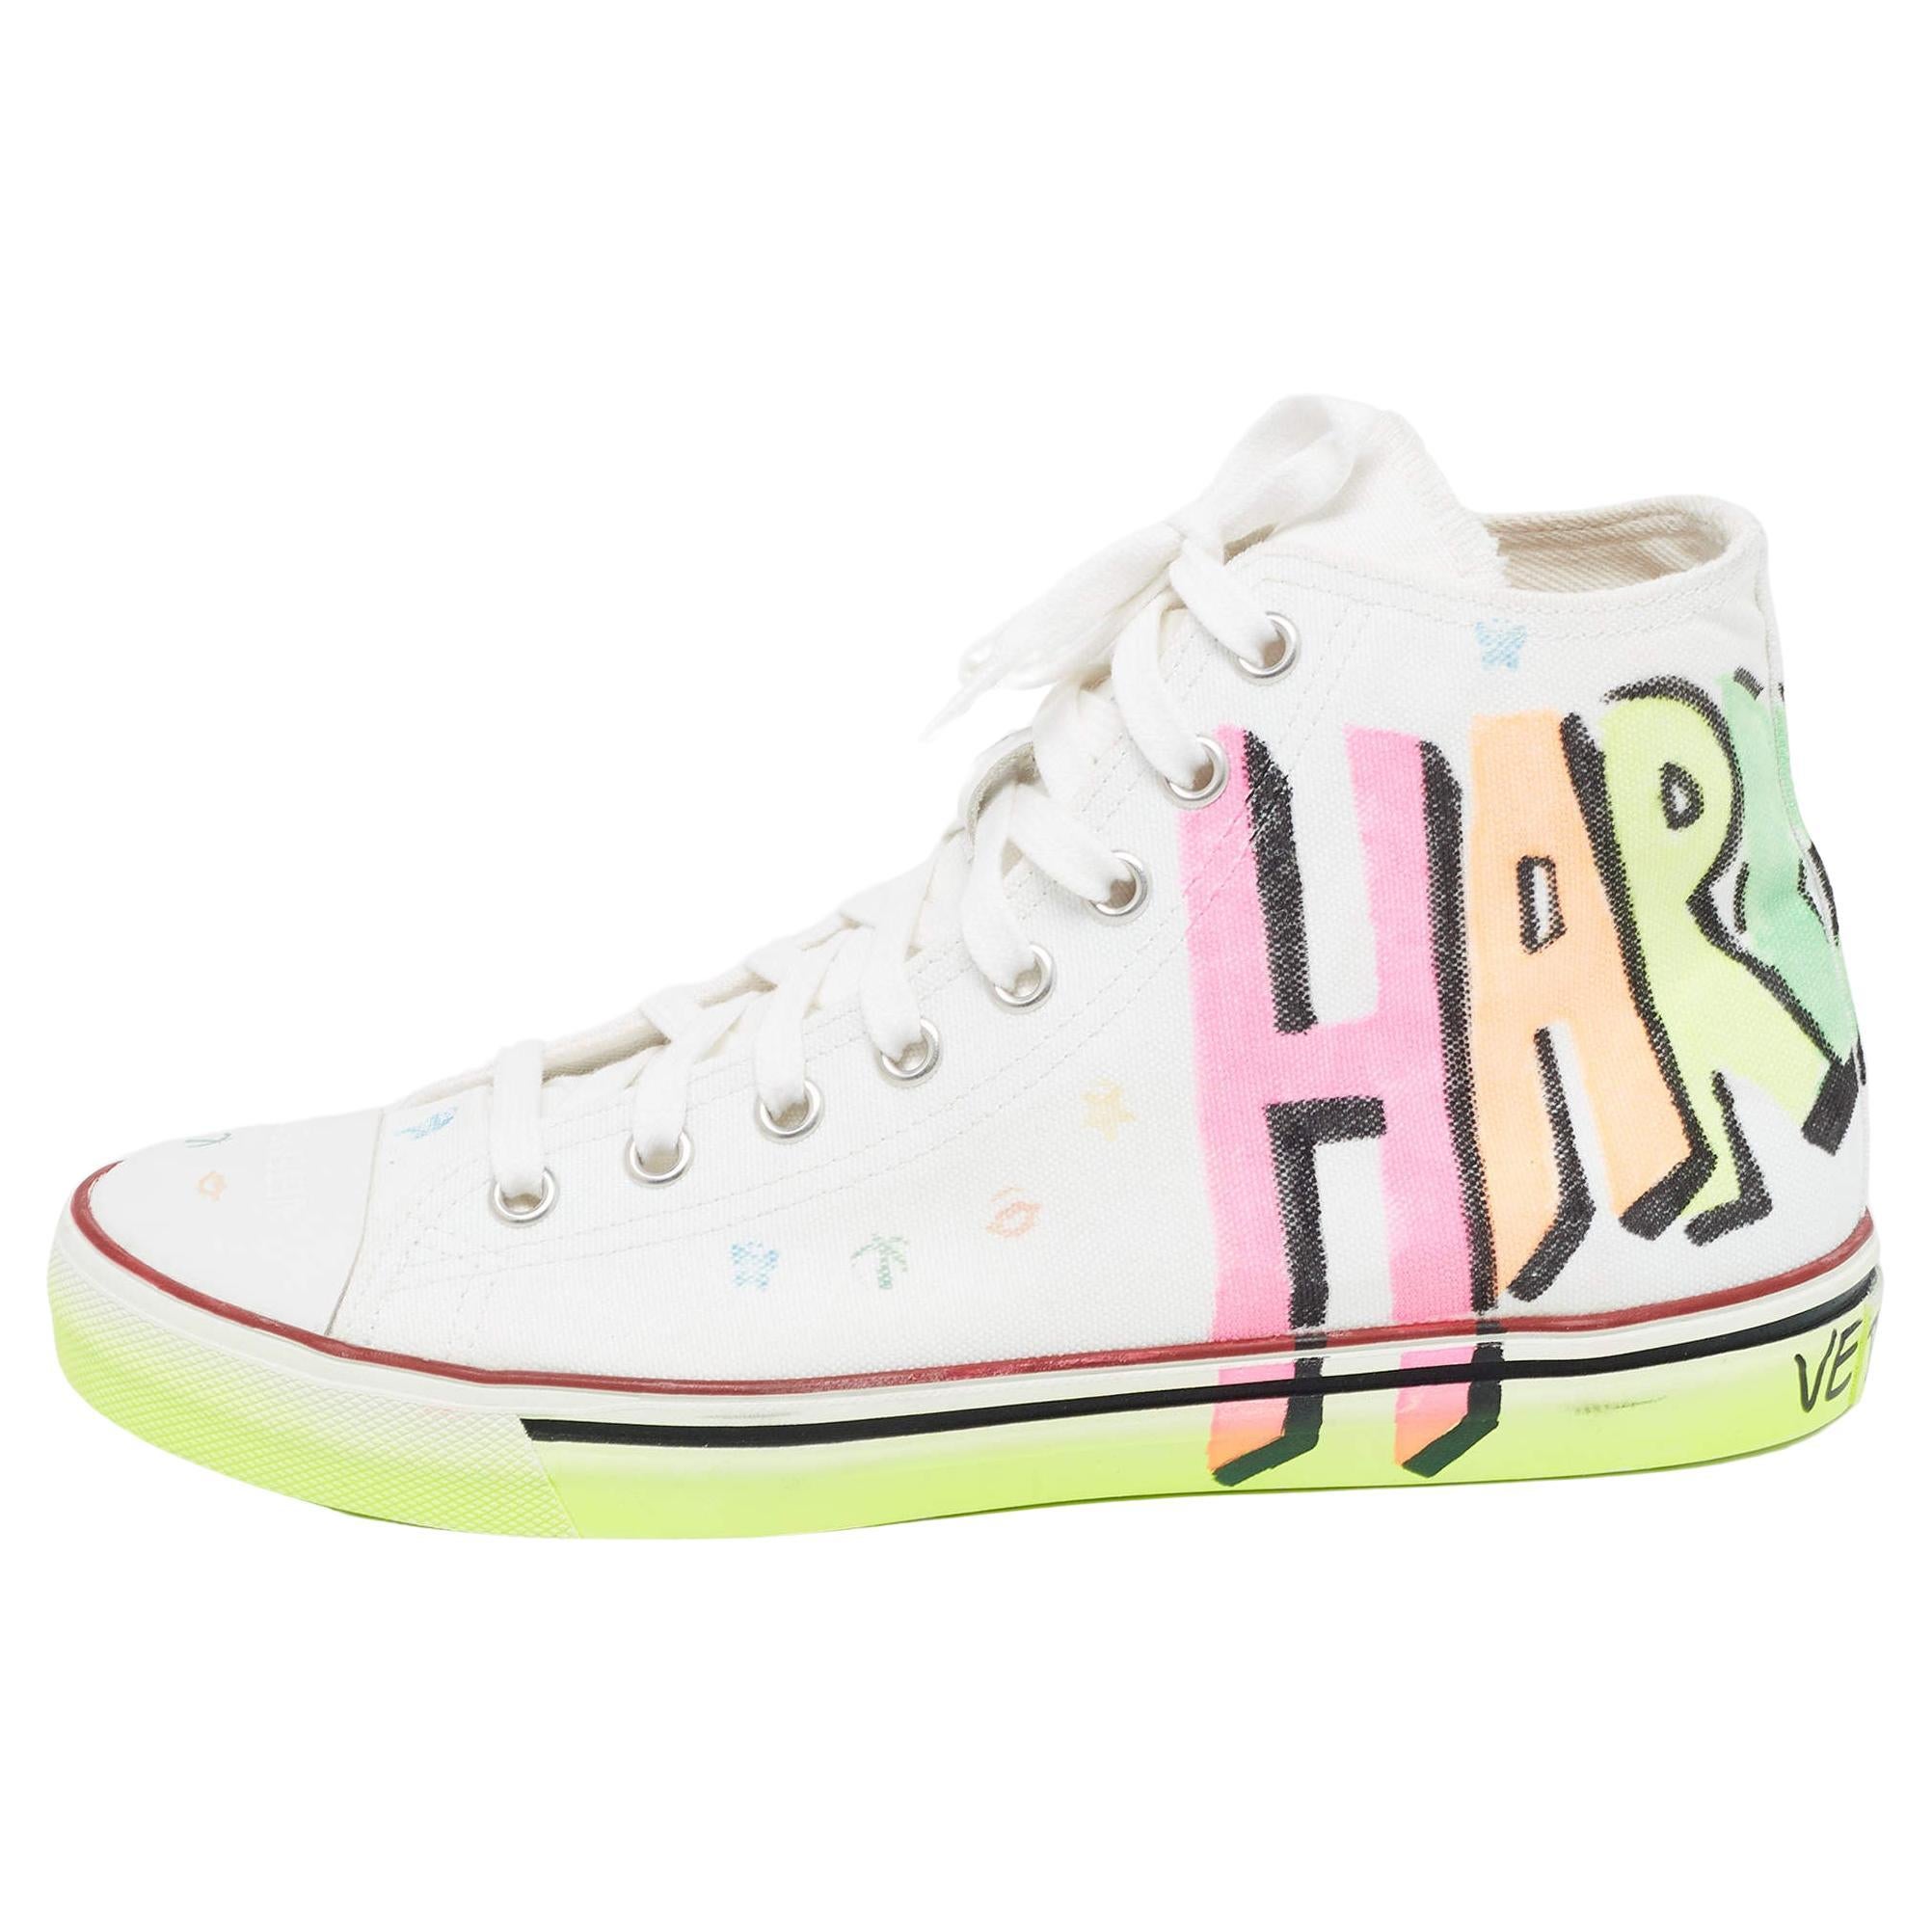 Vetements White Canvas Printed Hard Core Happiness High Top Sneakers Size 41 For Sale